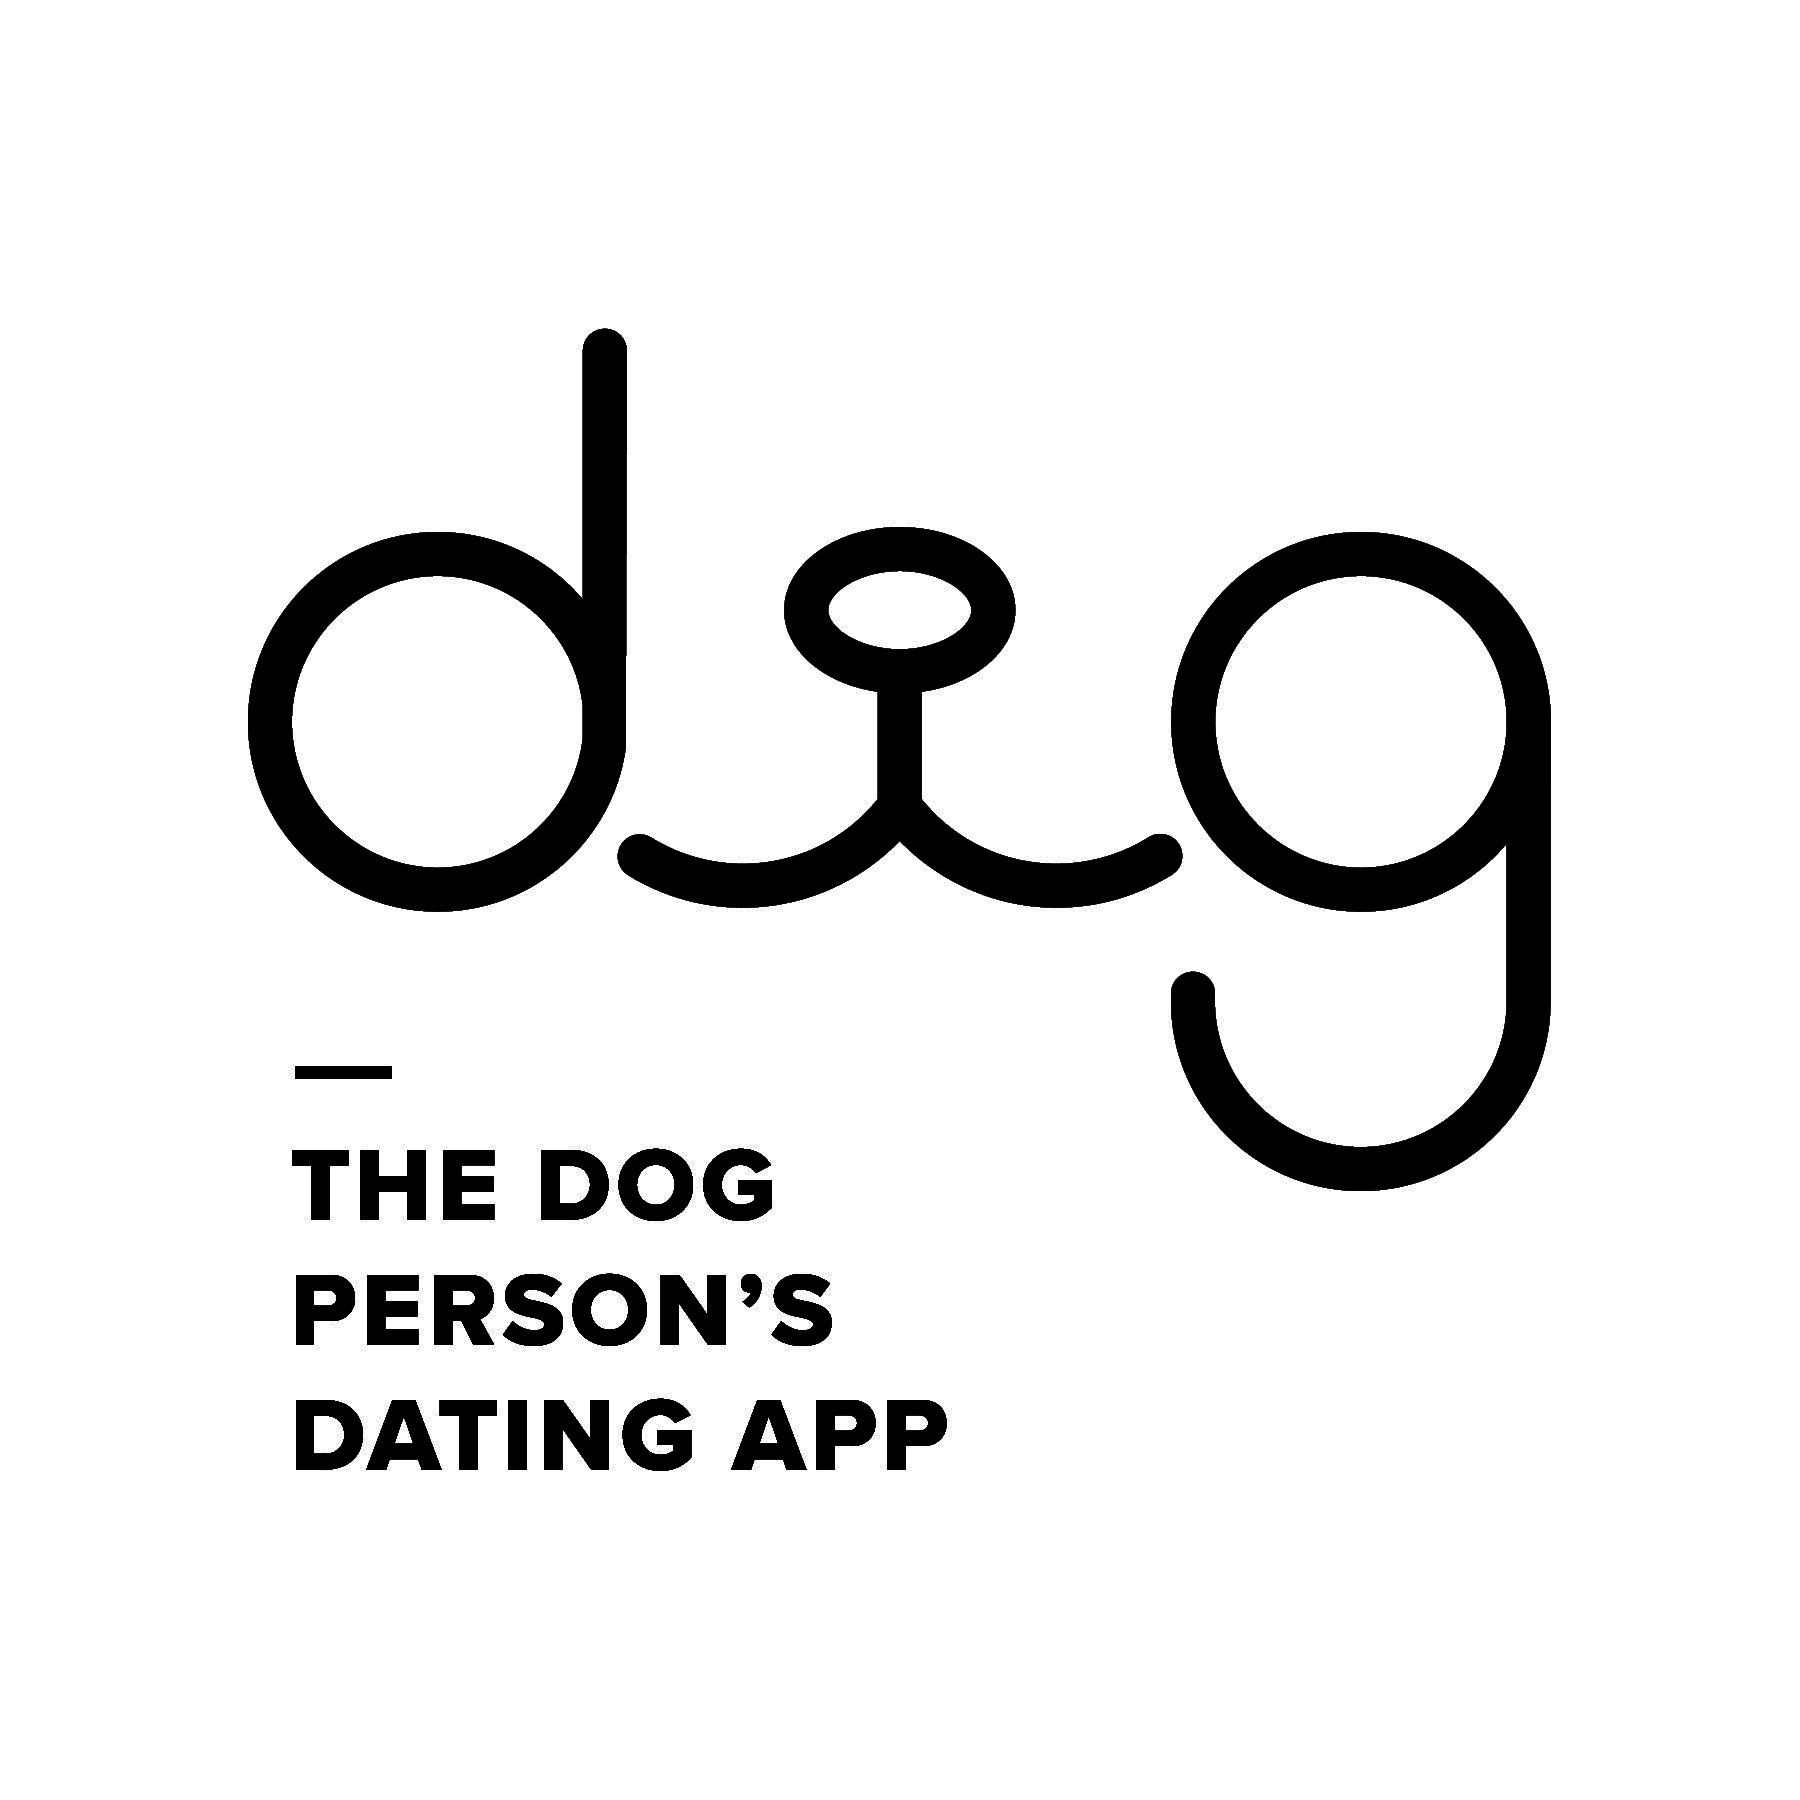 Dig - The Dog Person's Dating App